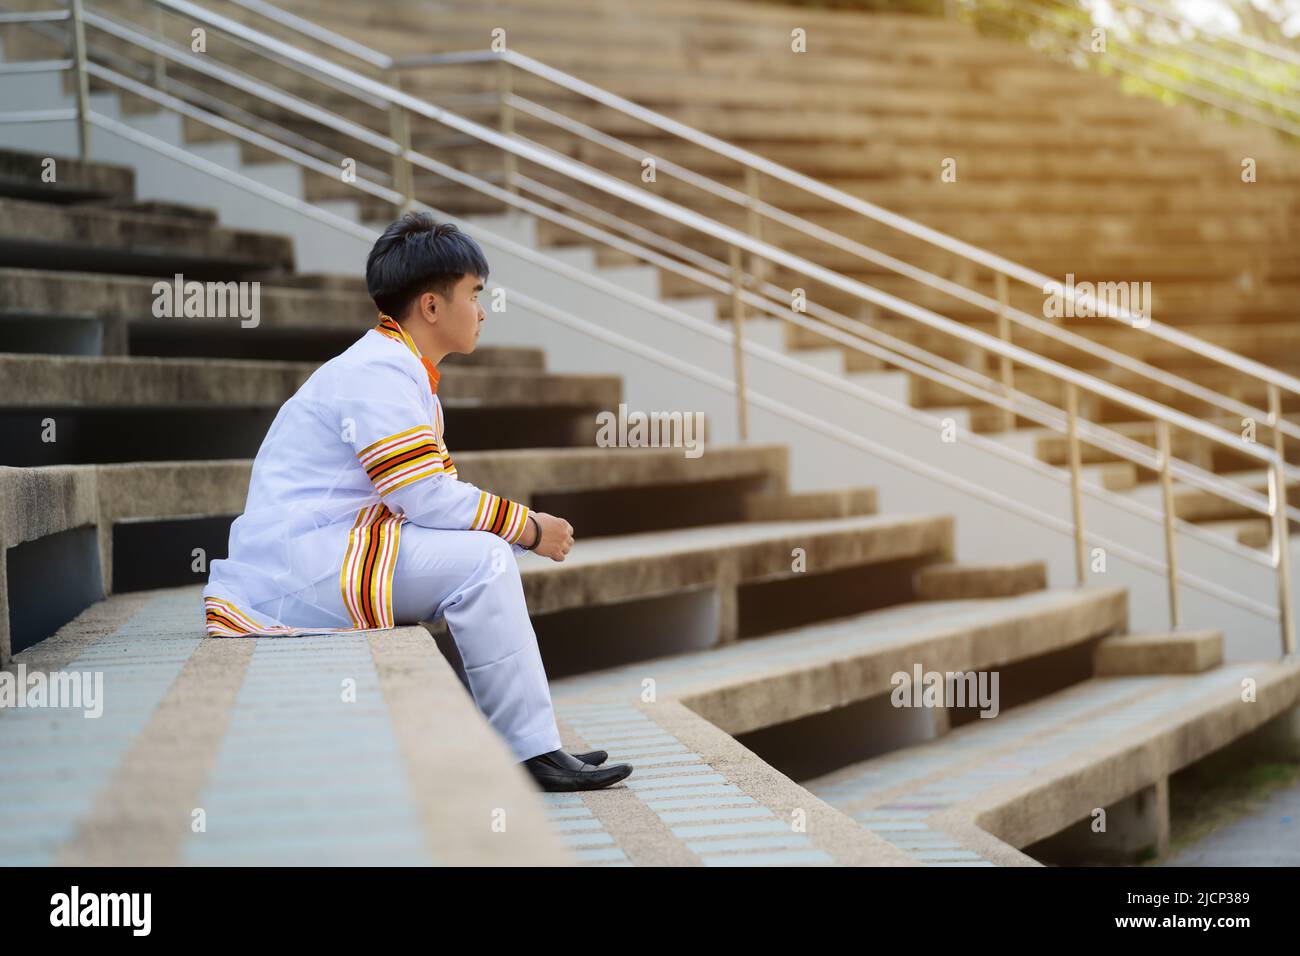 young man university graduates in graduation gown sitting on stairs Stock Photo